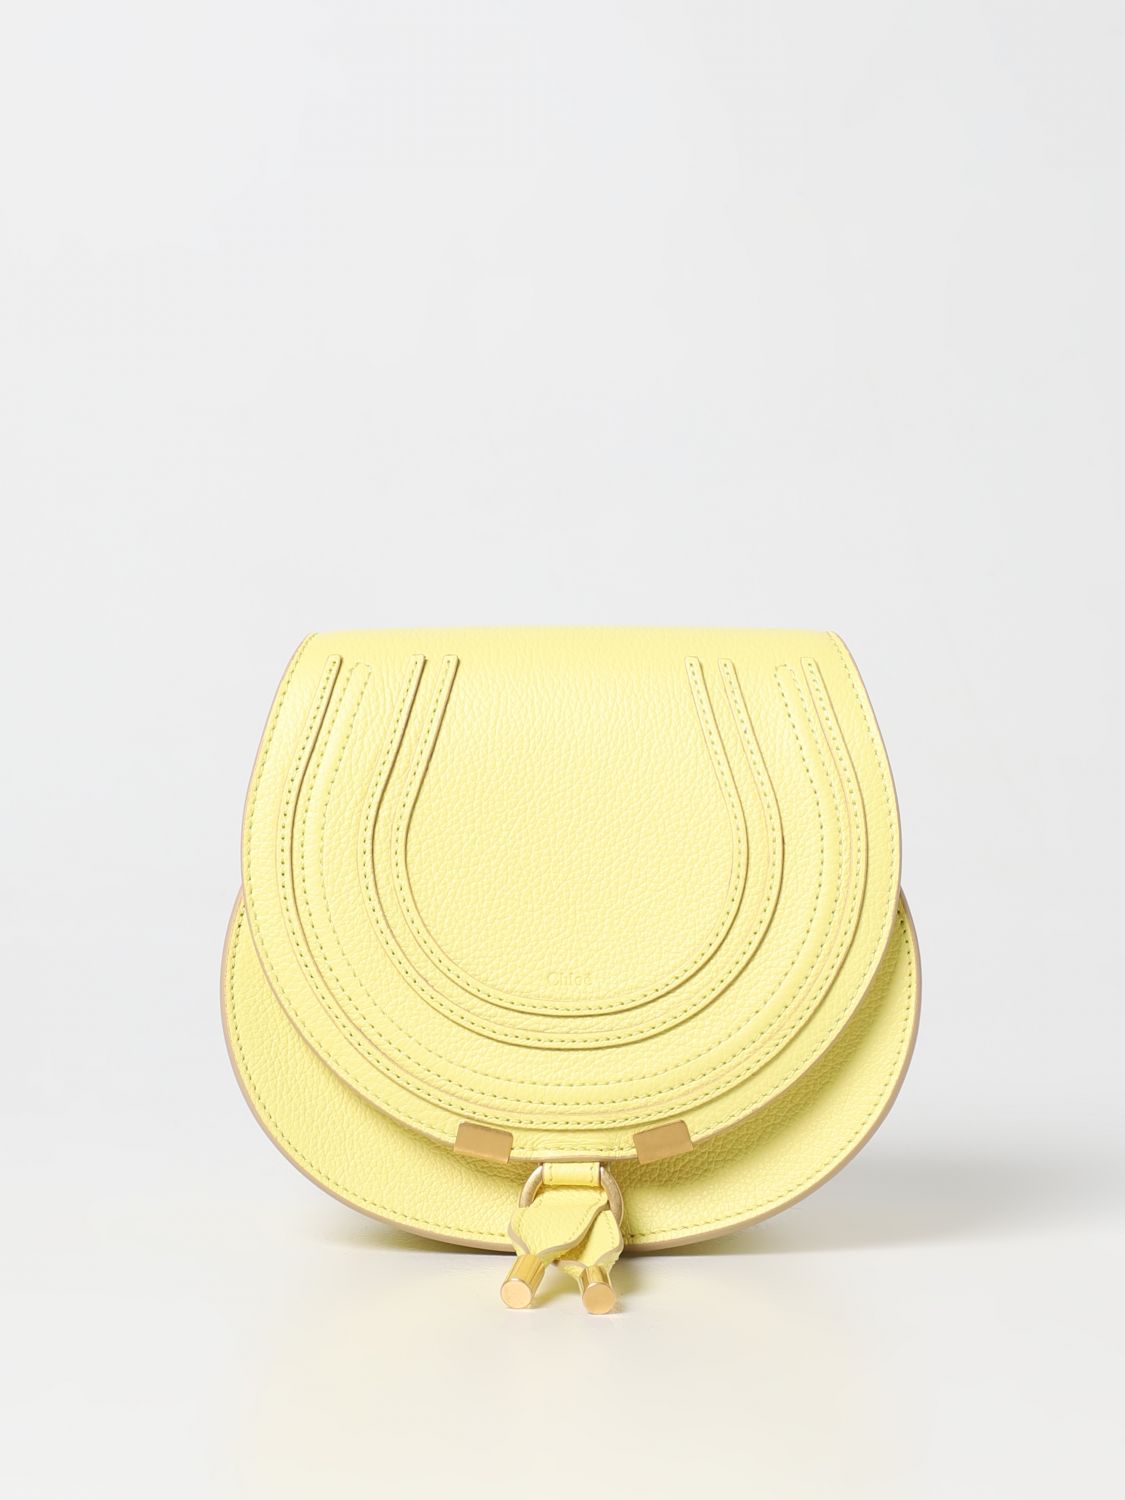 Chloe Small Marcie Saddle Bag in Yellow